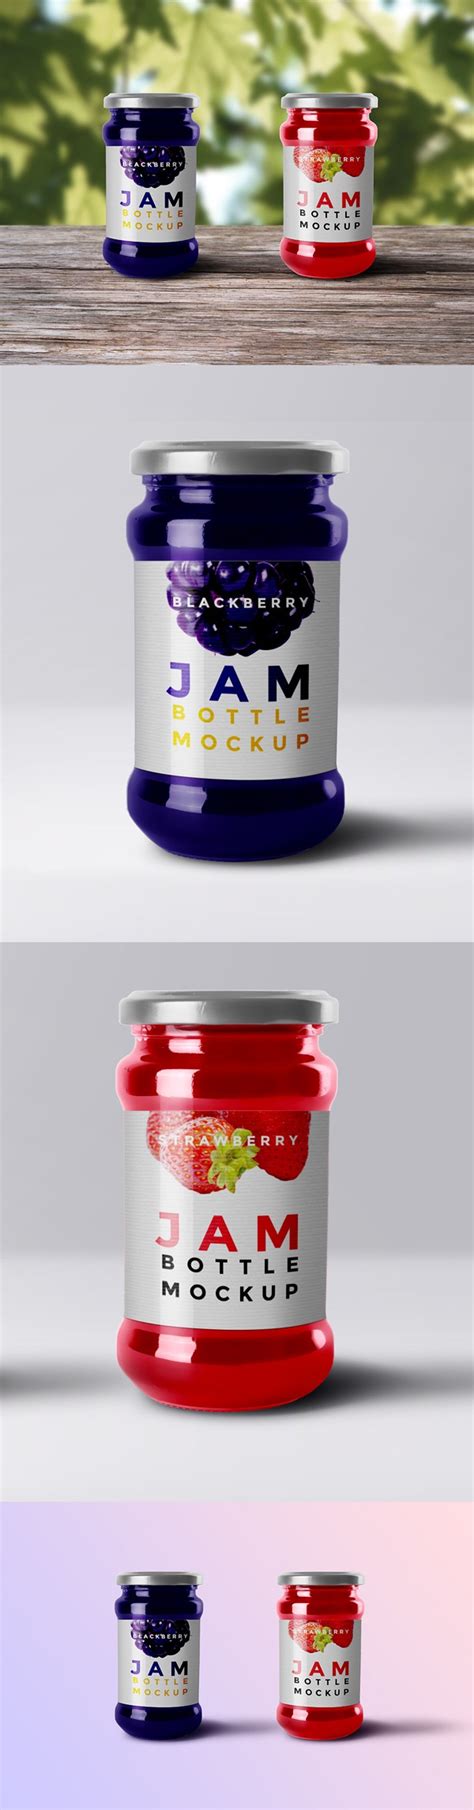 free jam bottle mockup psd by graphicsfuel on dribbble